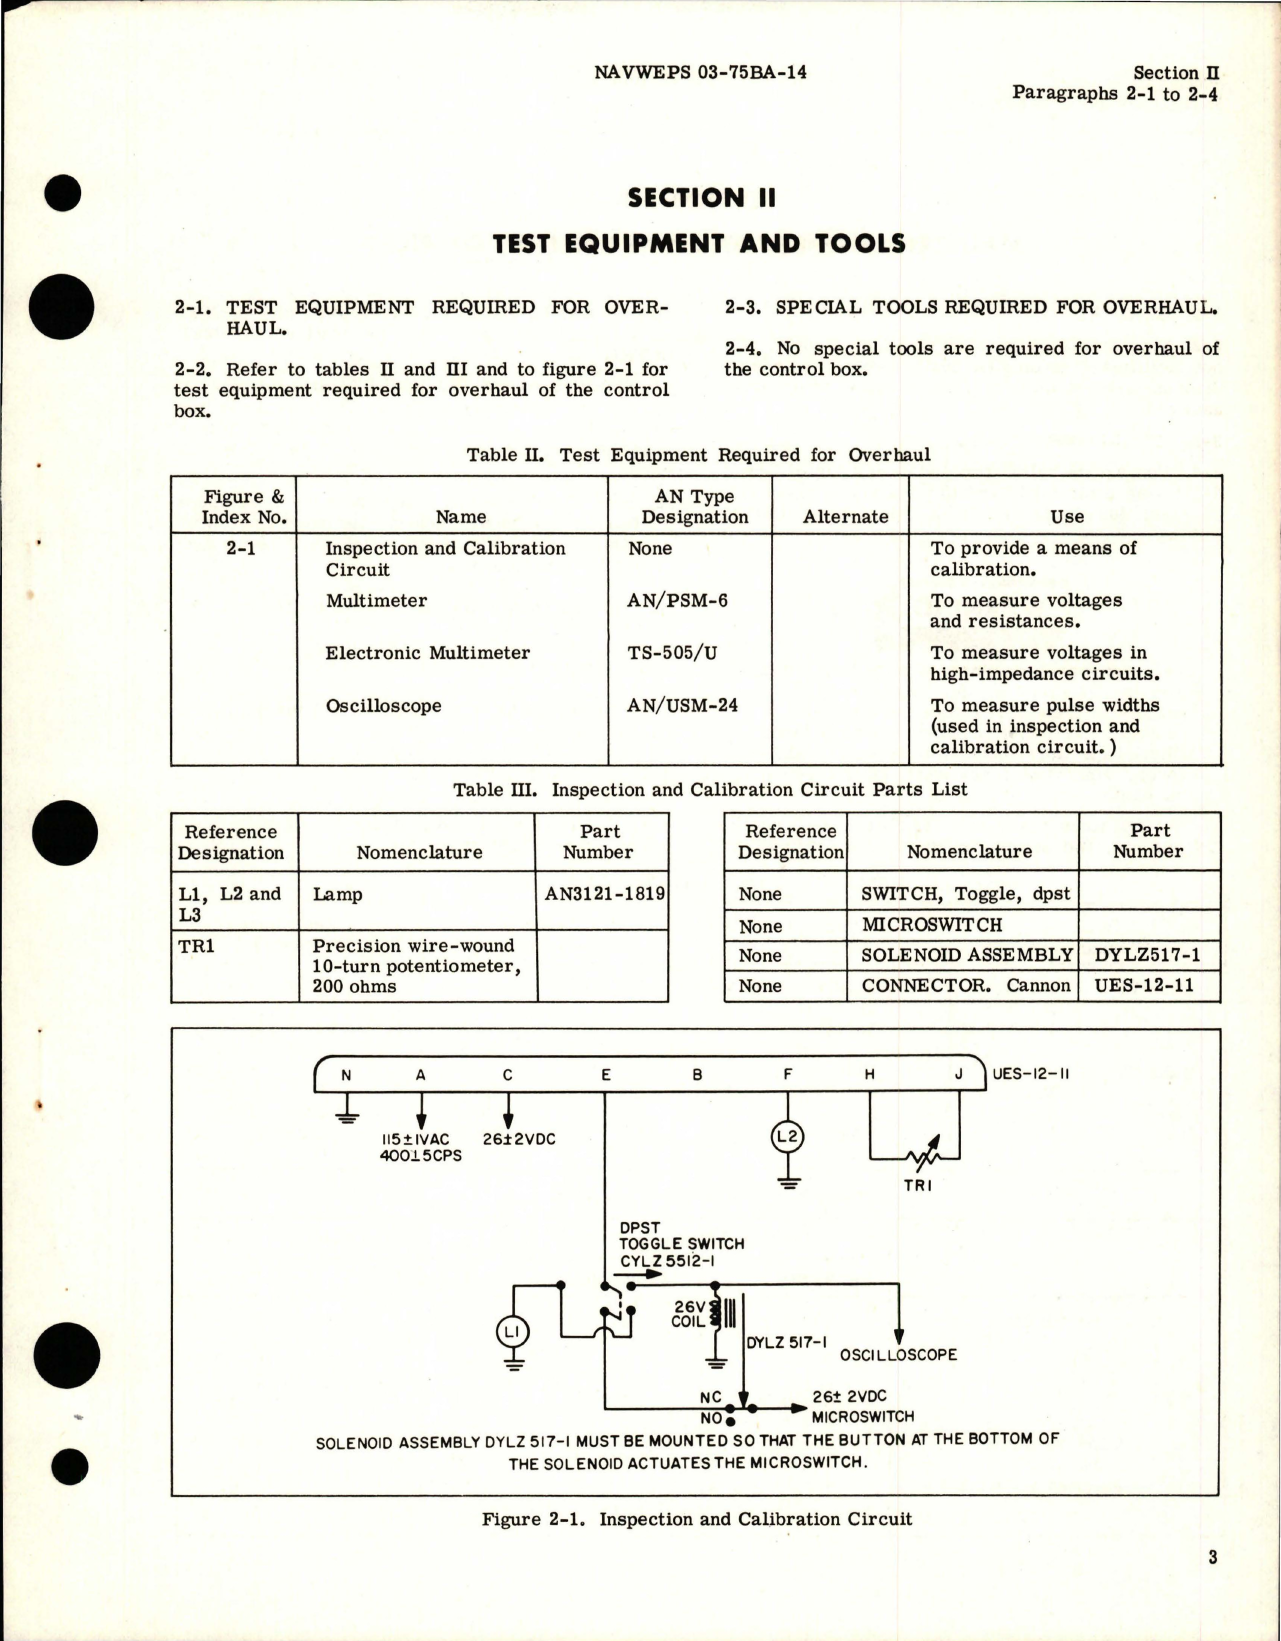 Sample page 7 from AirCorps Library document: Overhaul Instructions for Control Box Canopy Defrost - Parts CYLZ 5512-1 and CYLZ 5512-2